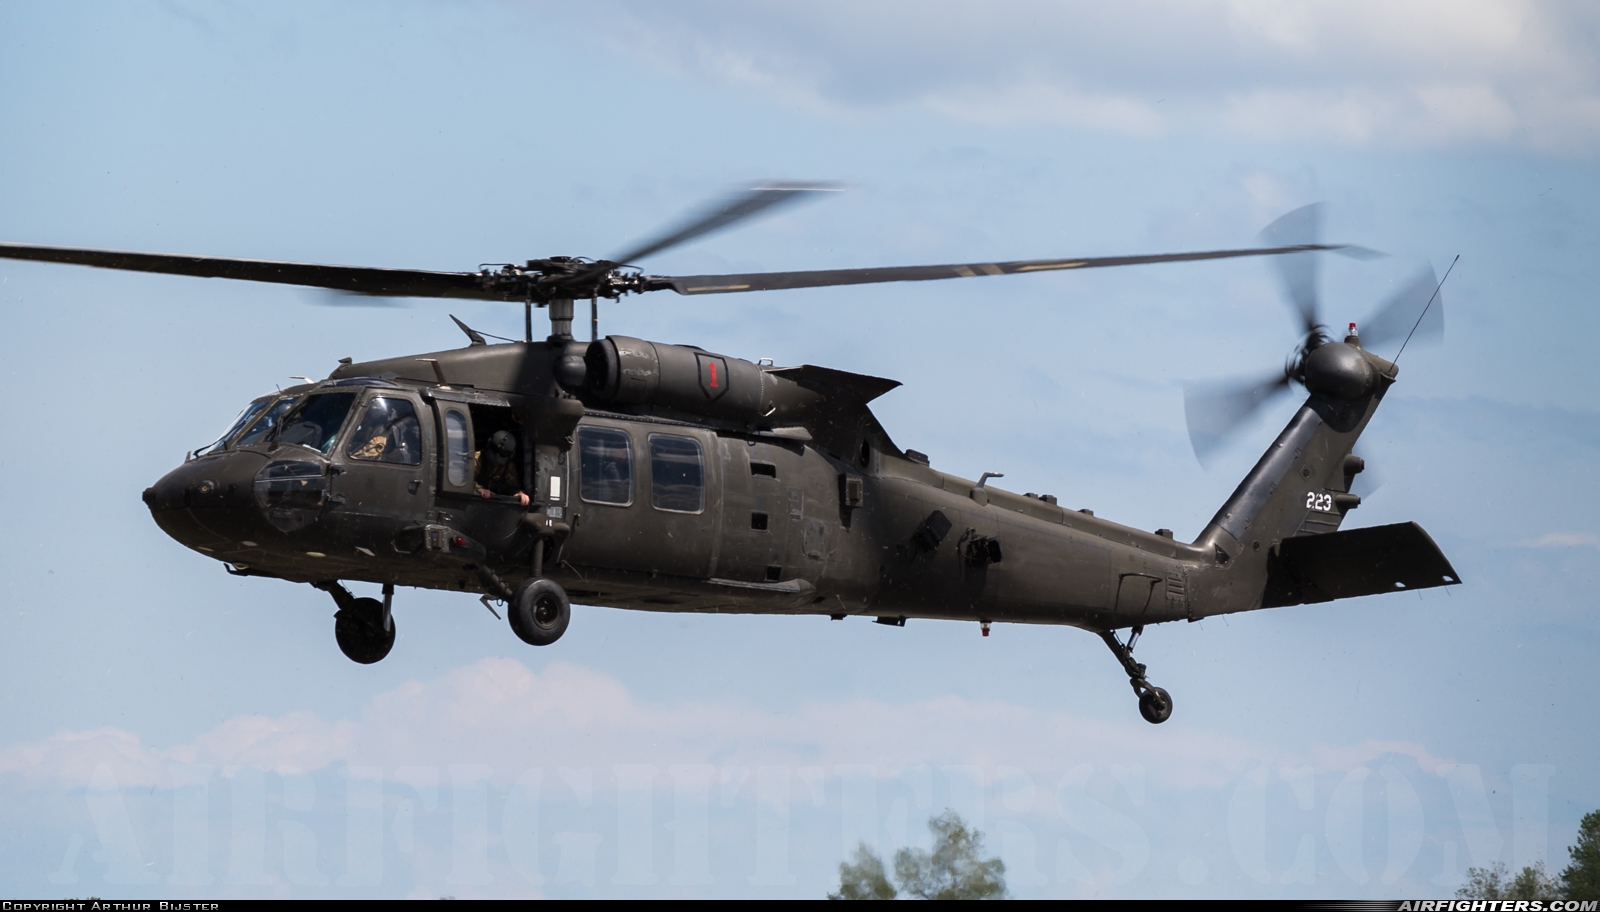 USA - Army Sikorsky UH-60M Black Hawk (S-70A) 09-20223 at Cherbourg - Maupertus (LFRC), France